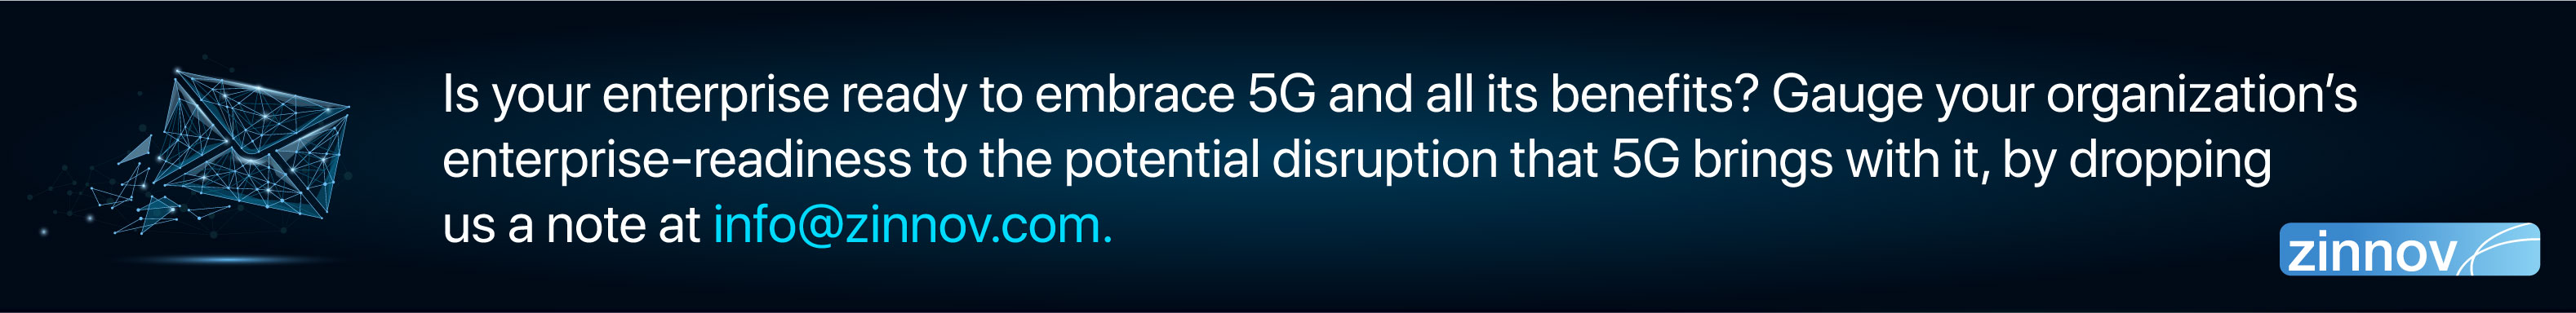 enterprise ready to embrace 5G and all its benefits